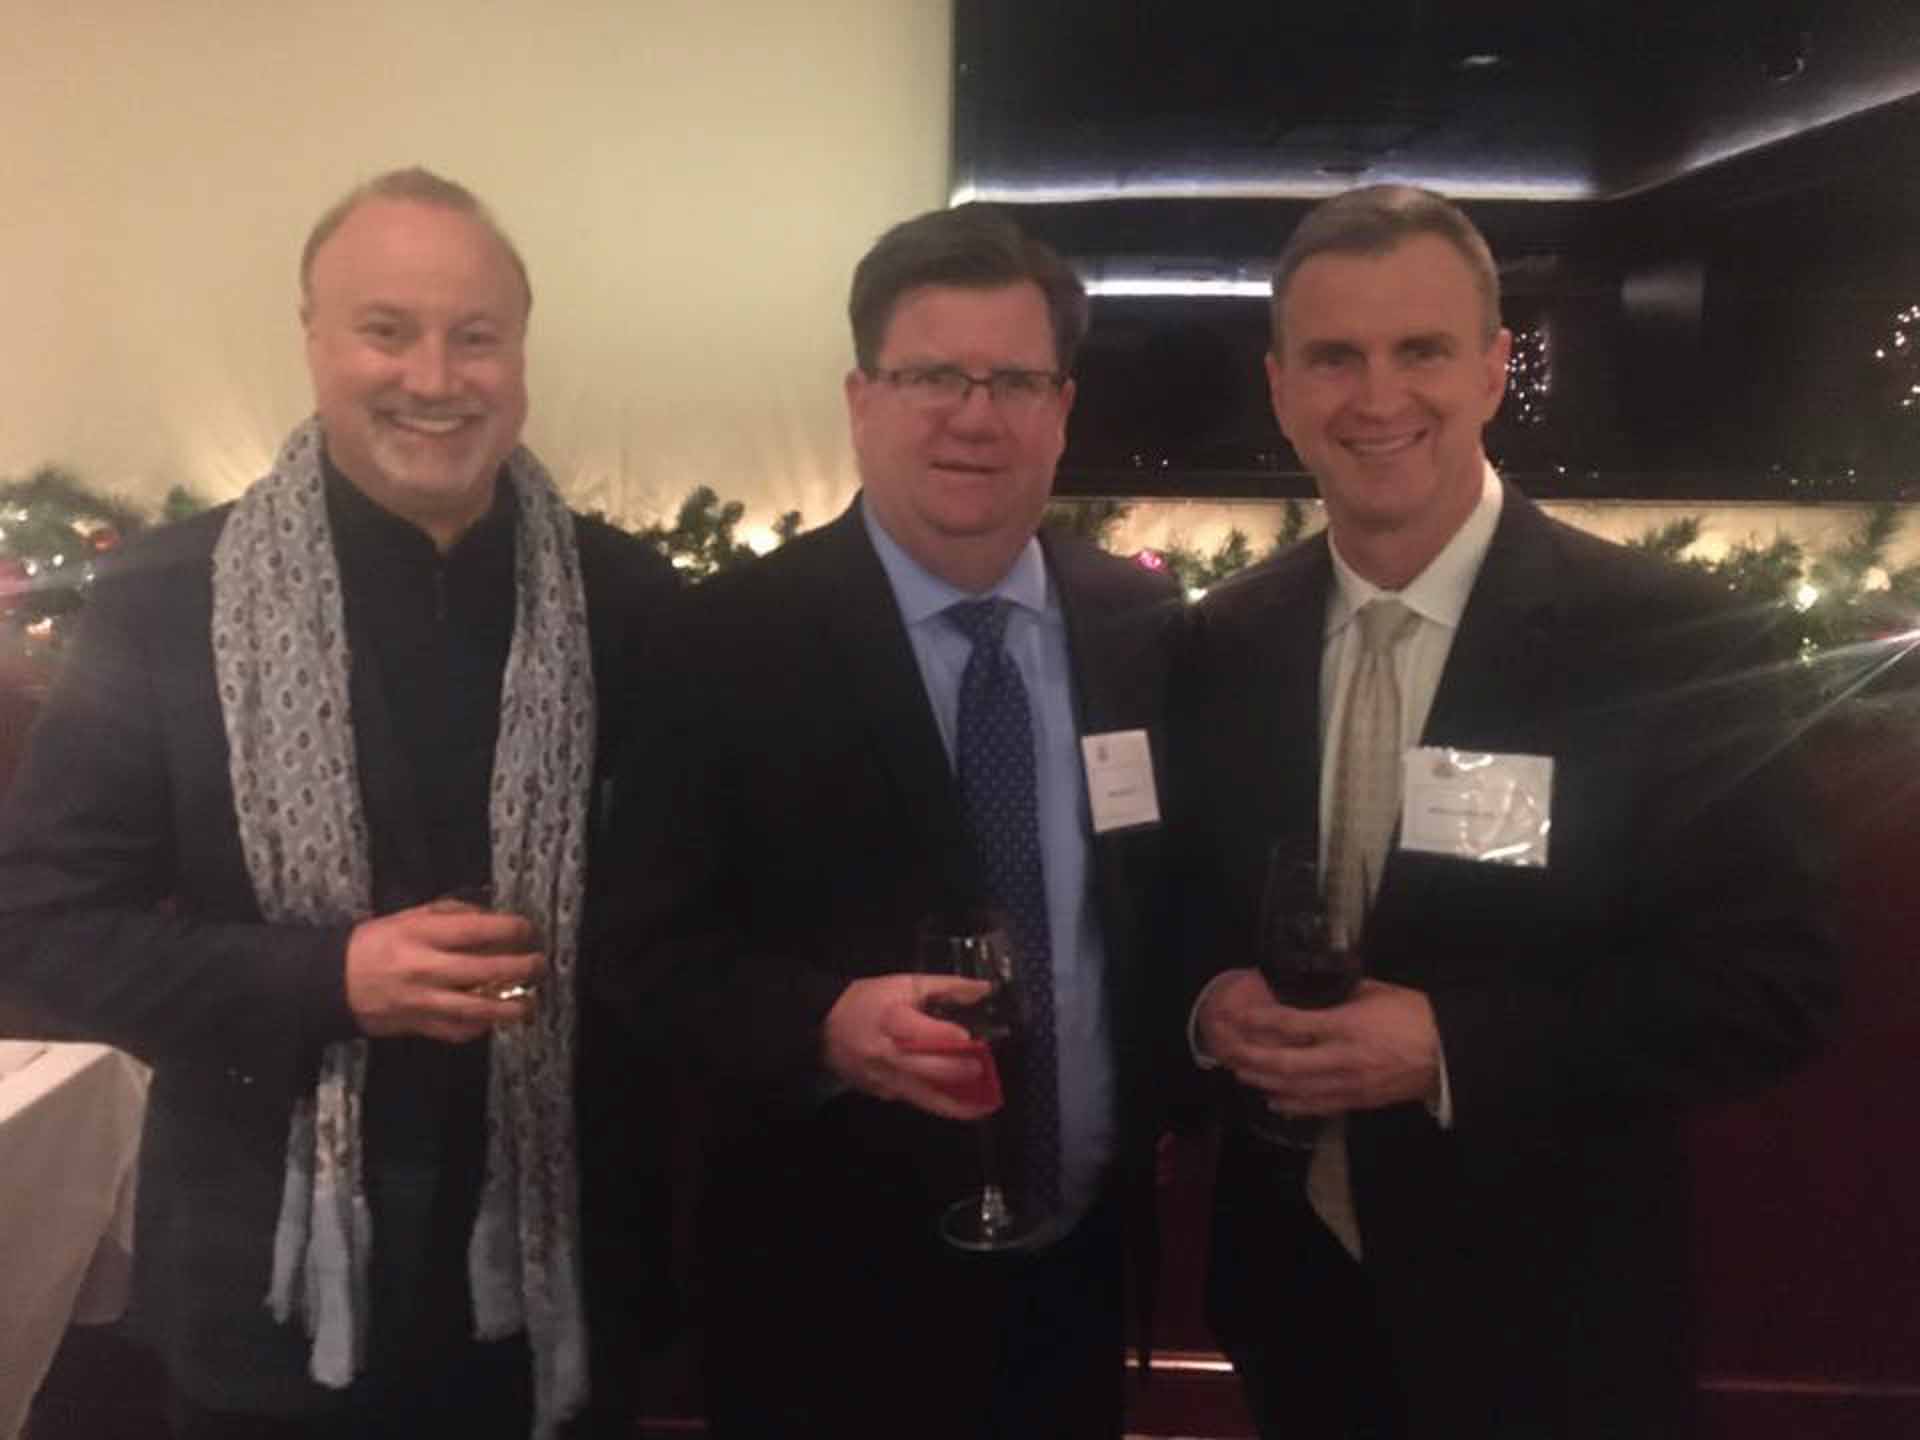 law-association-christmas-social-2019-three-people-smiling-while-attending-the-christmas-social